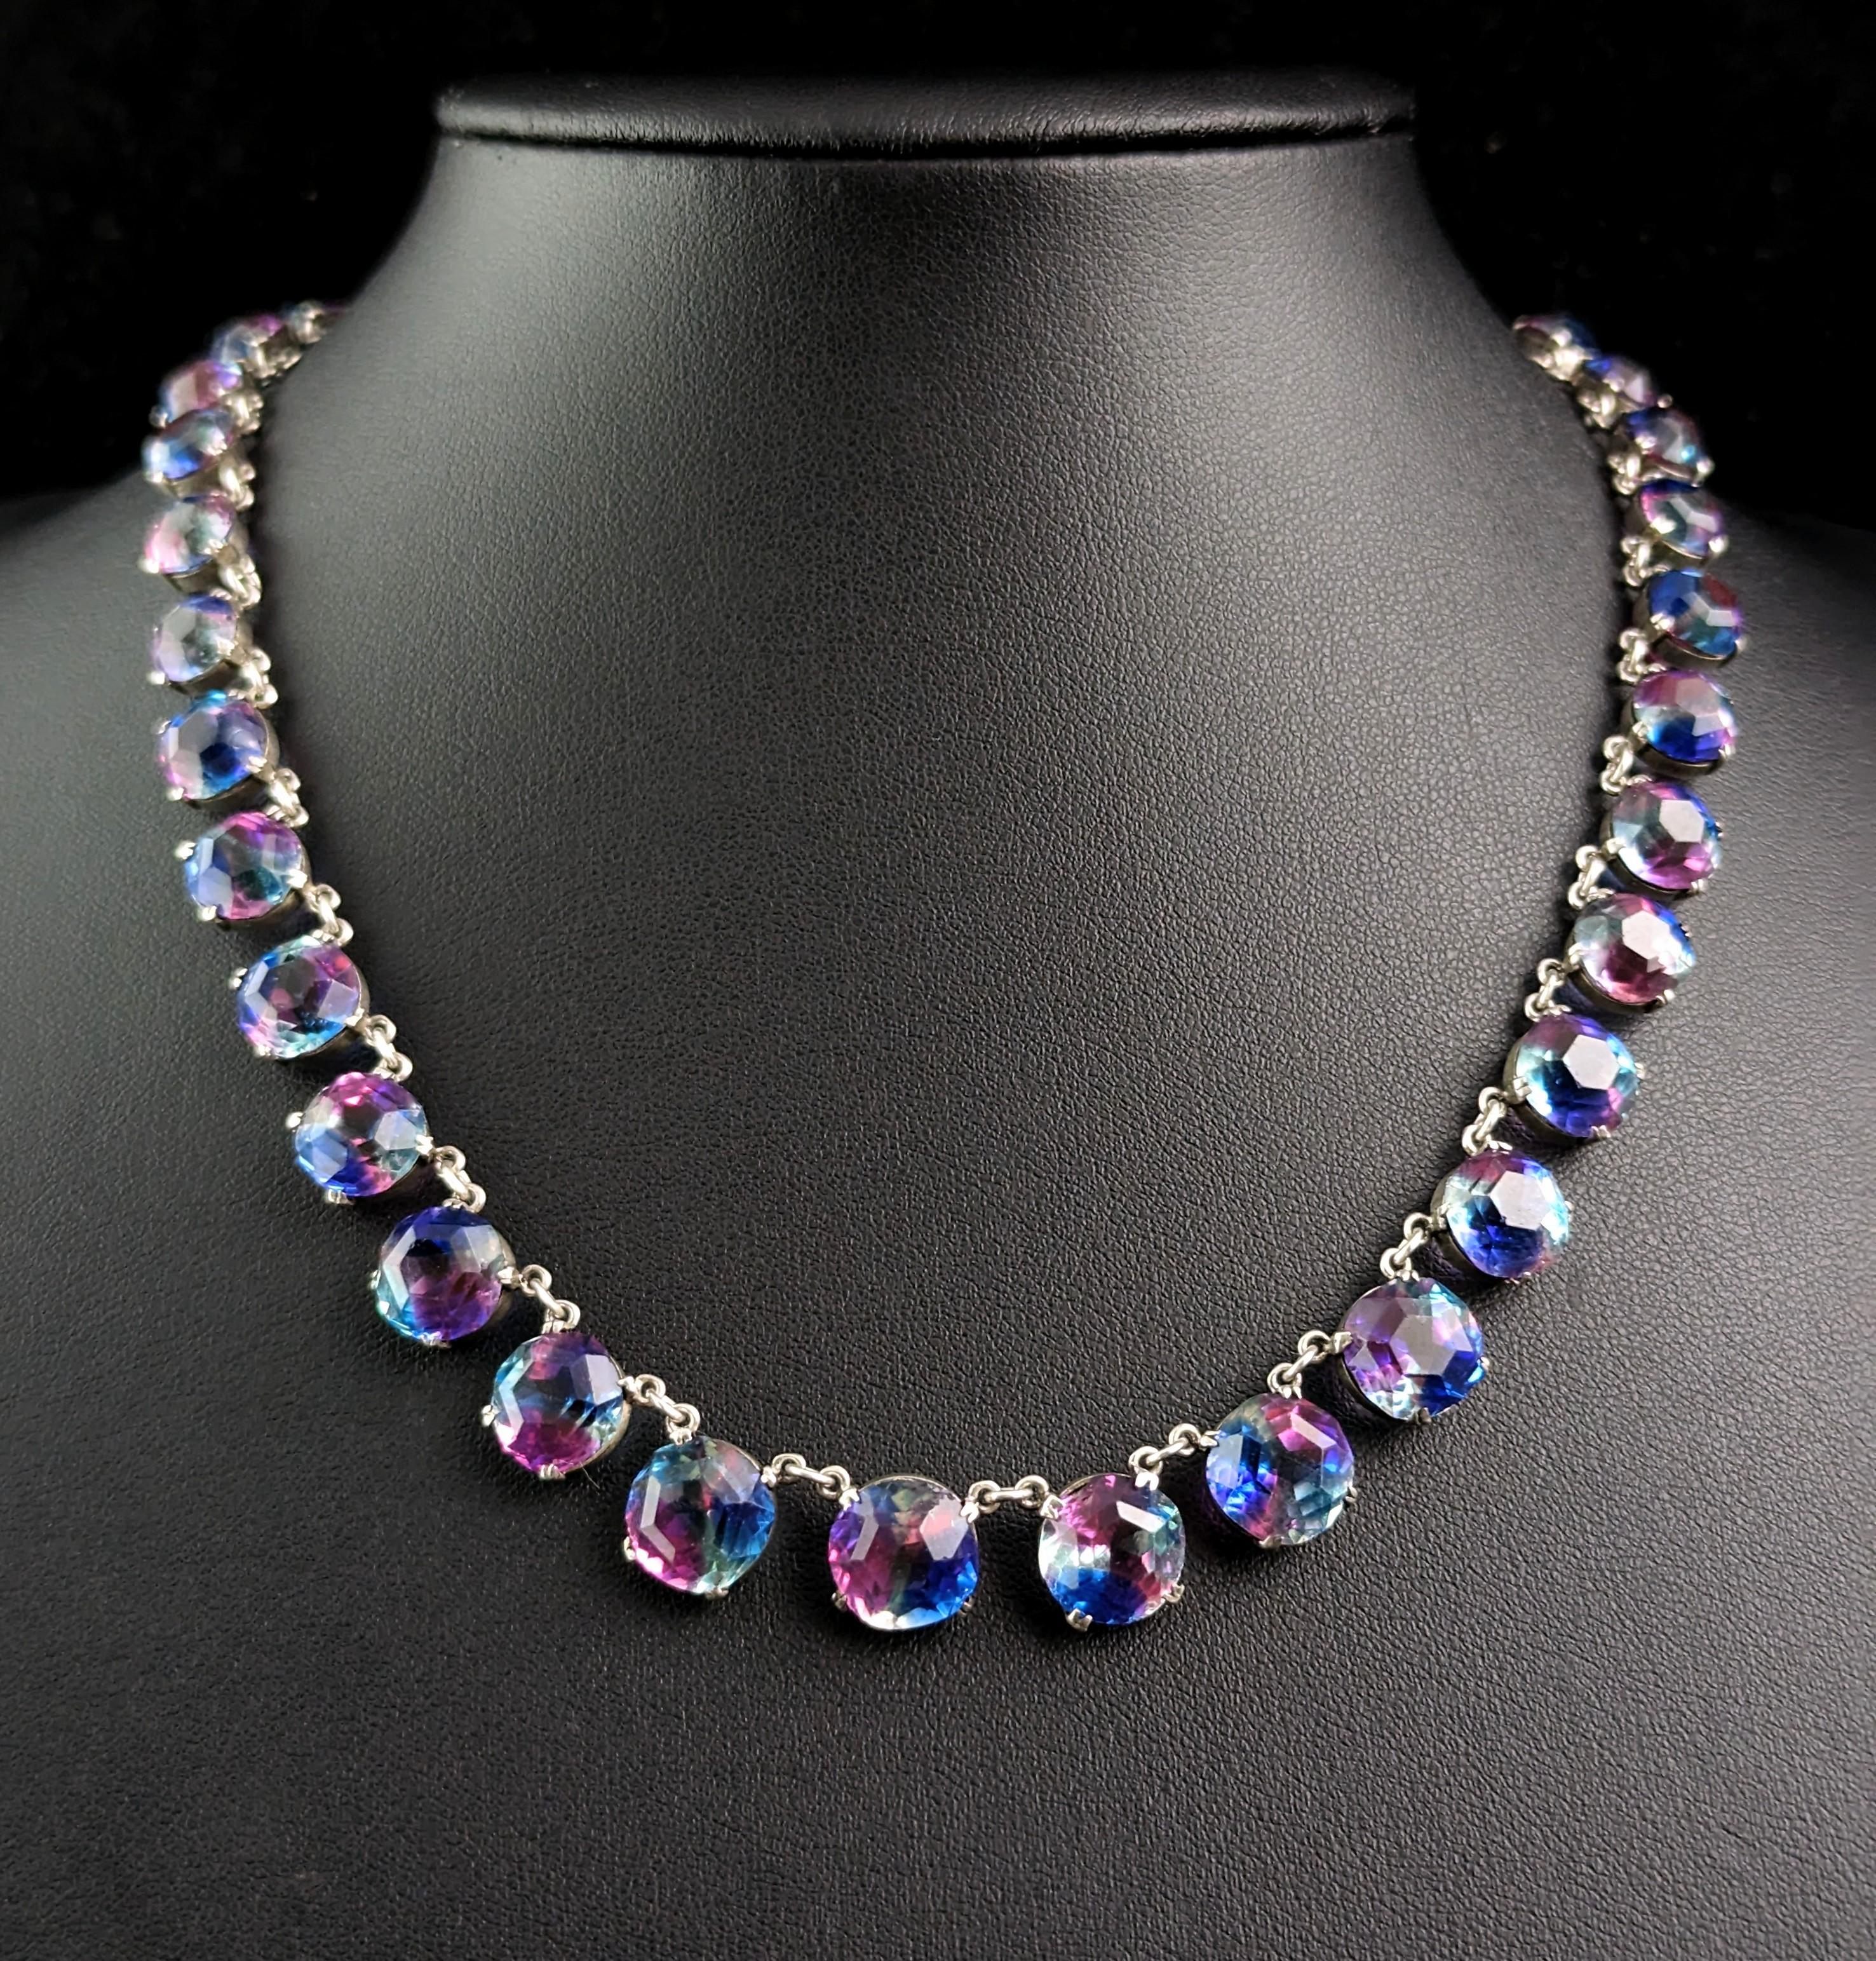 A vintage paste Riviere necklace is a fantastic addition to any vintage jewellery collection, even moreso when it is made from the wonderfully pretty Iris glass.

This necklace has all the sparkle without the price tag making it the perfect piece to